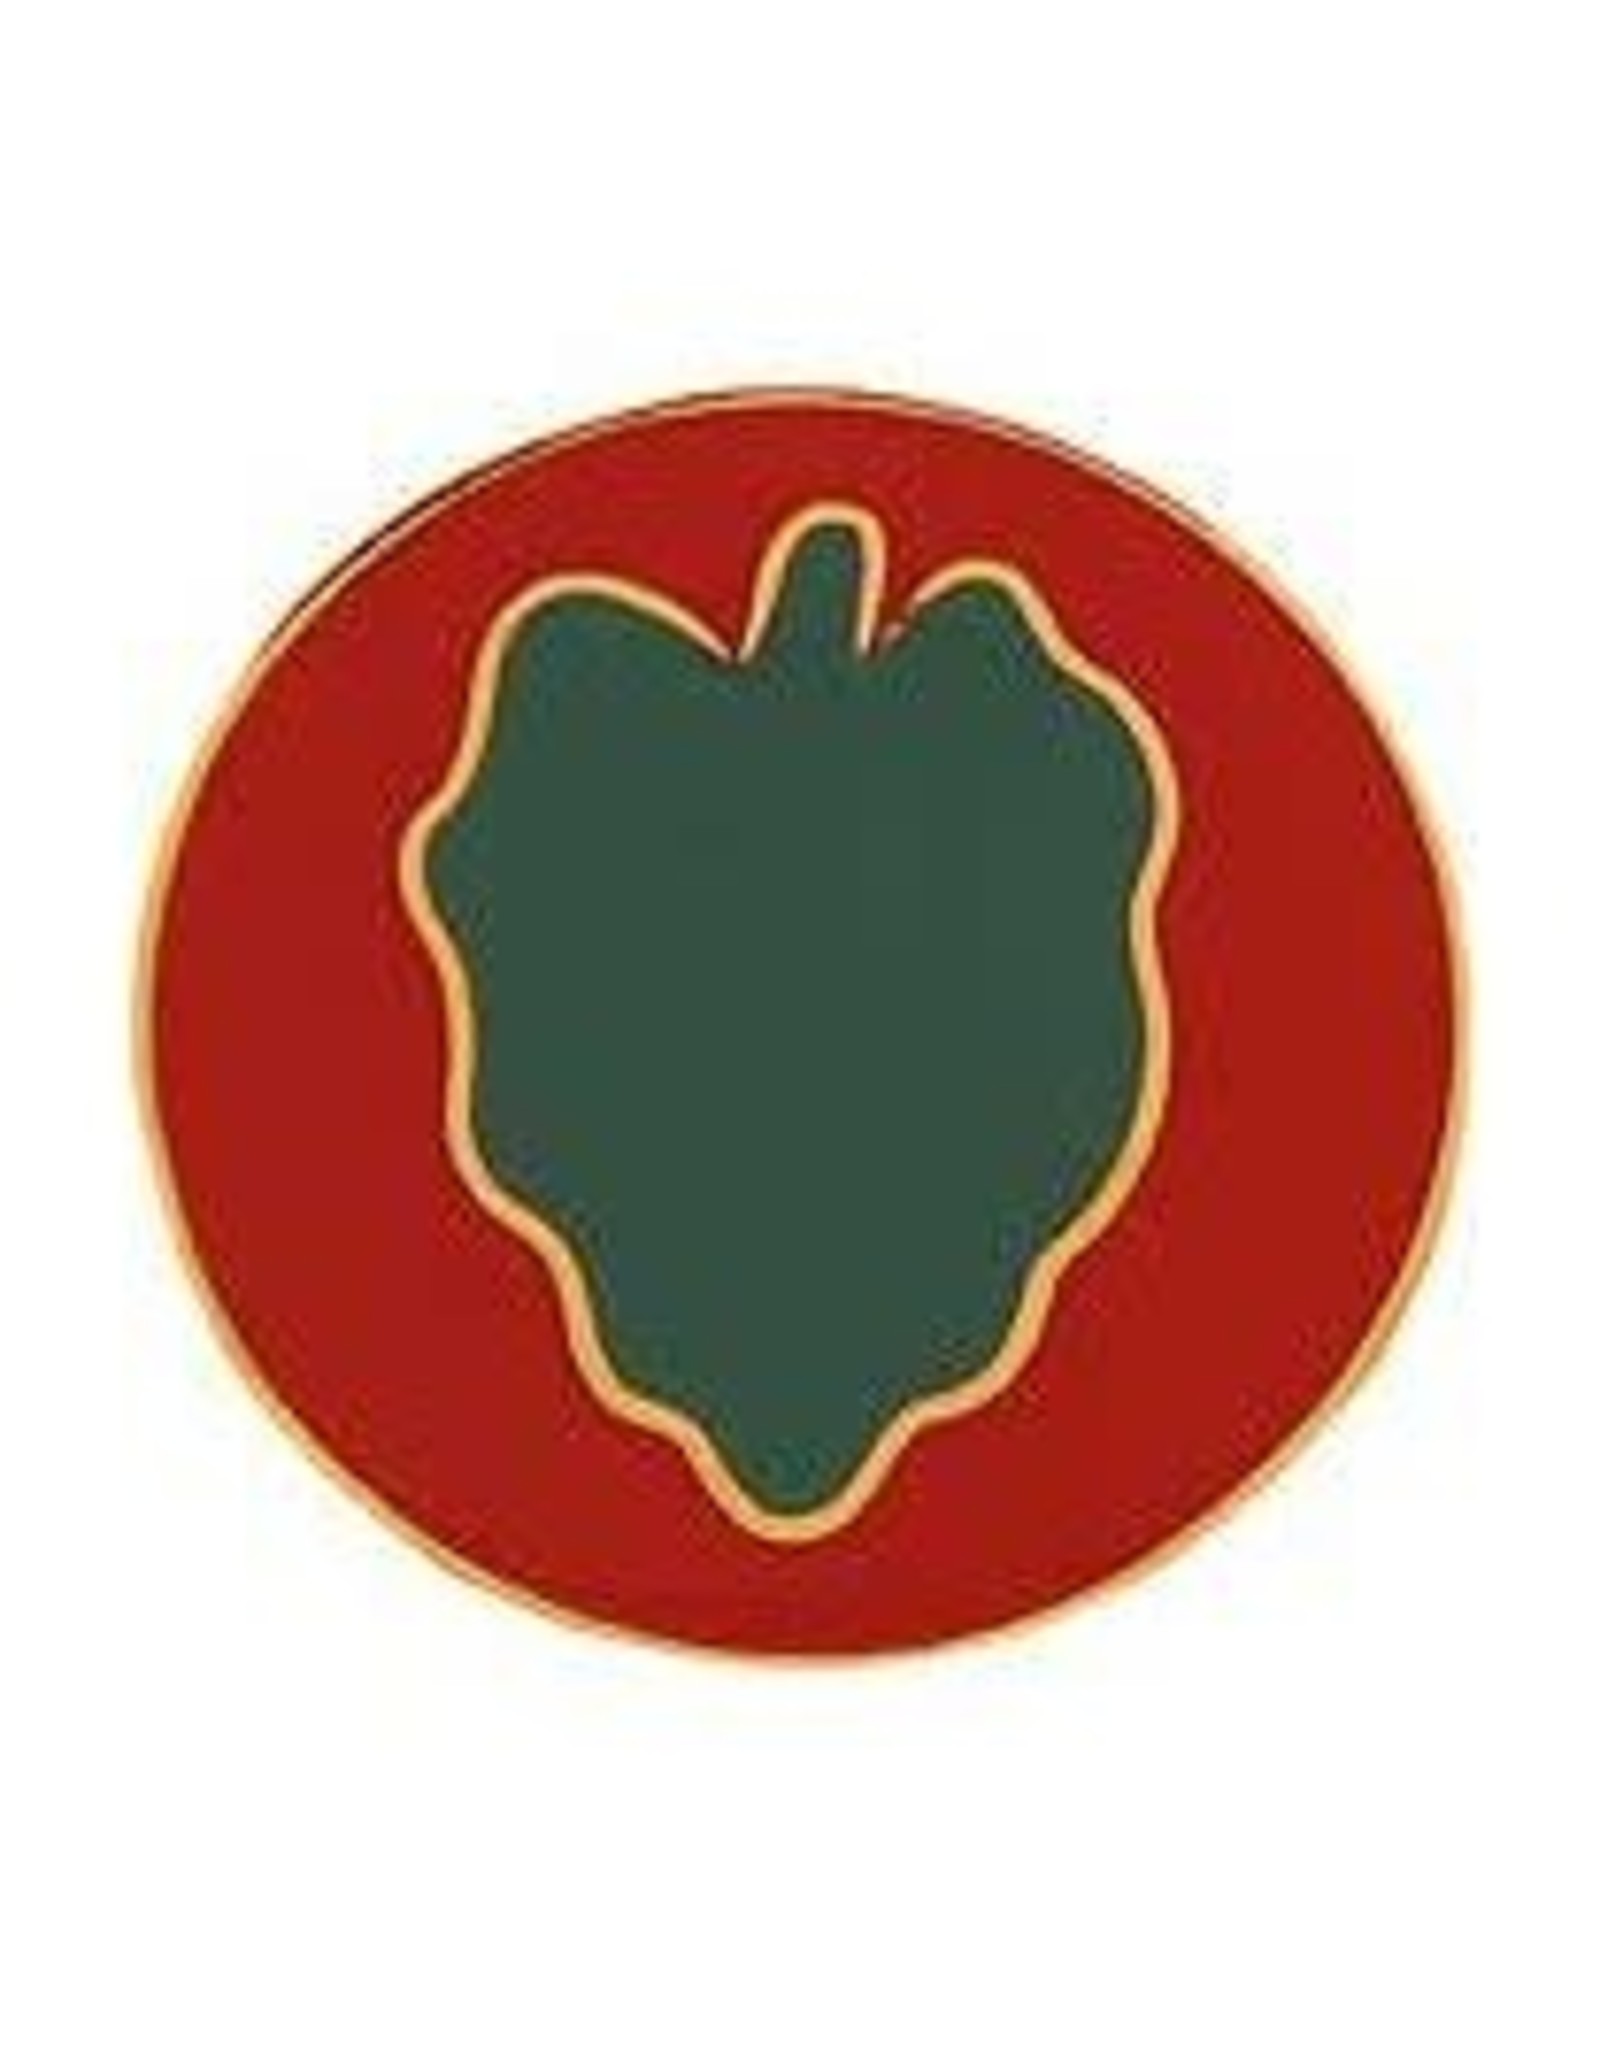 Pin - Army 024th Inf Div